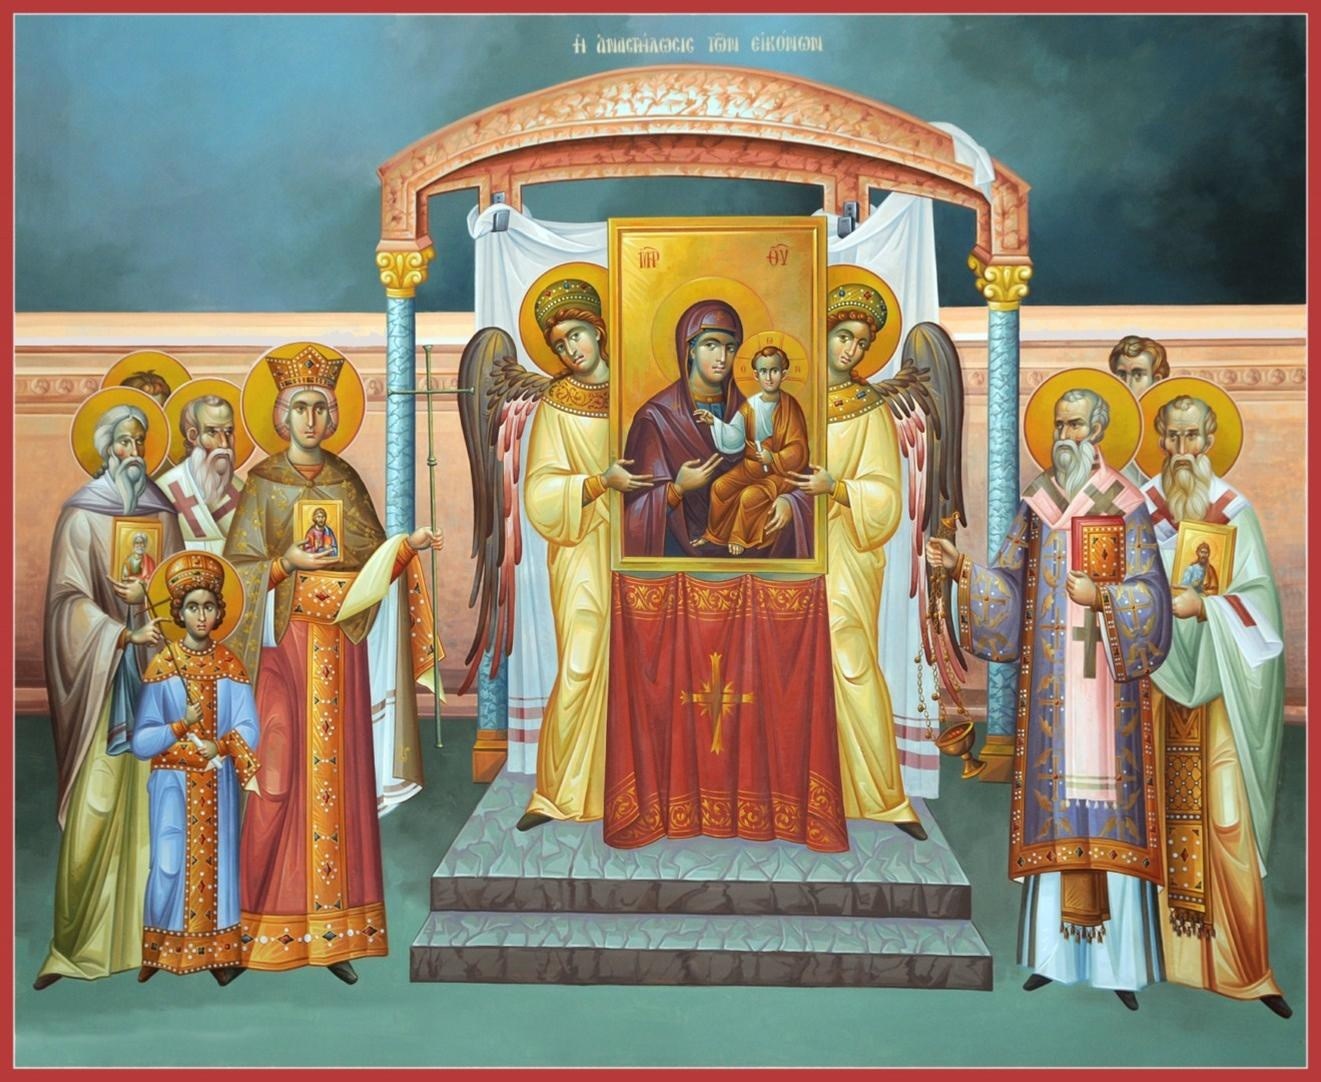 Sunday Bulletin March 01, 2015 Sunday of Orthodoxy Eudokia of Heliopolis & Andonina the New Martyr Transfiguration of our Lord Greek Orthodox Church 414 St.